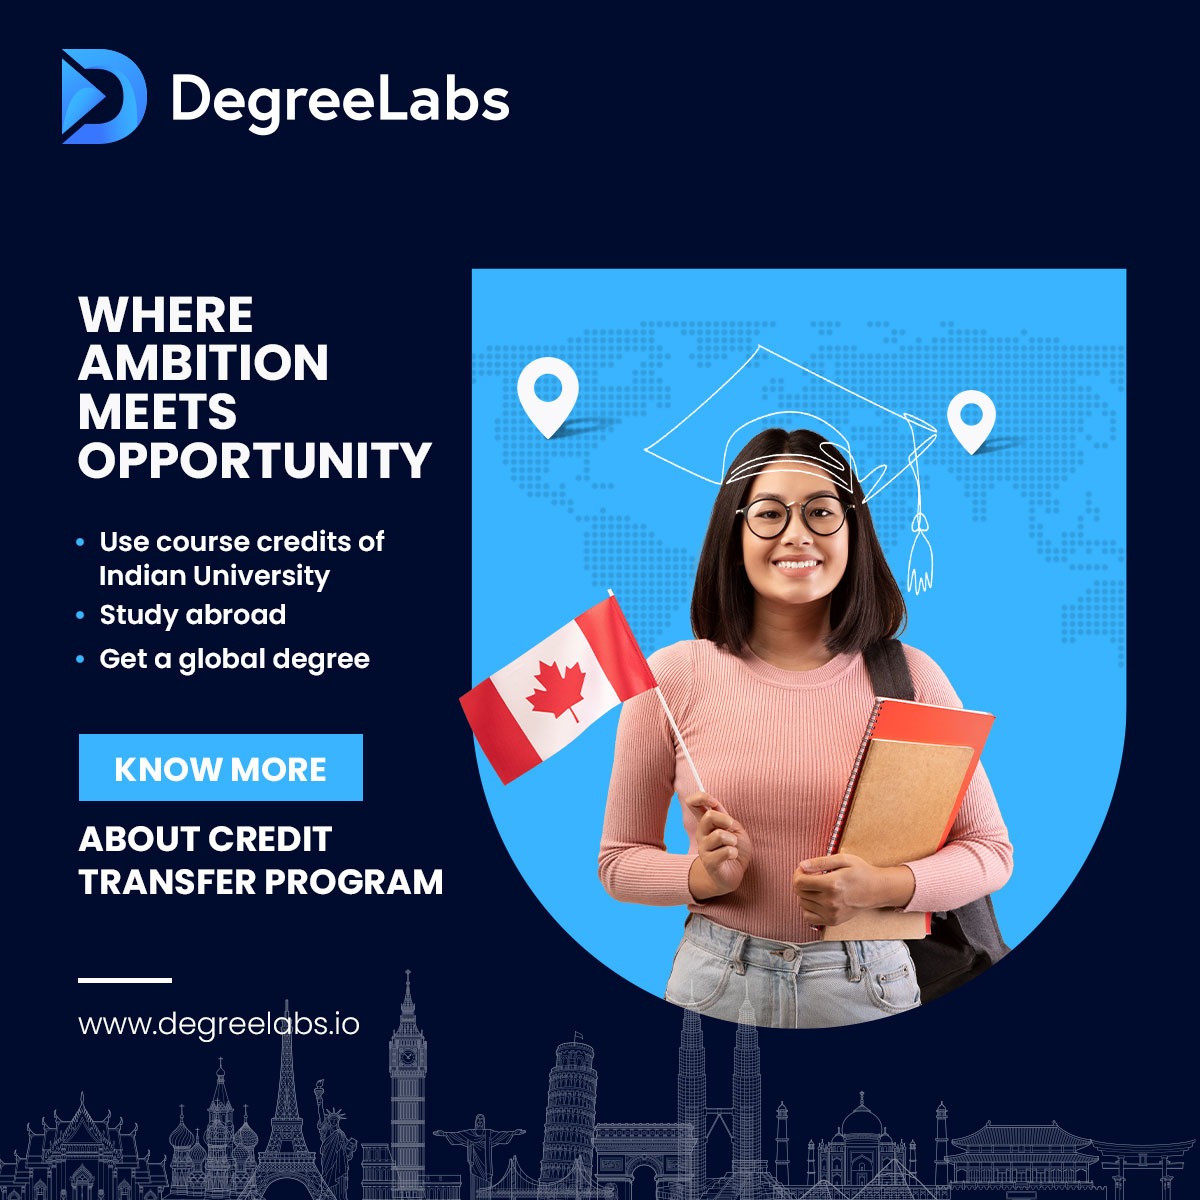 We at #Degreelabs believe that education should know no bounds. That's why we offer a unique #CreditTransferProgram that allows you to use your existing course credits from an #Indianuniversity towards earning a #globaldegree. 

Click here to know more: degreelabs.io